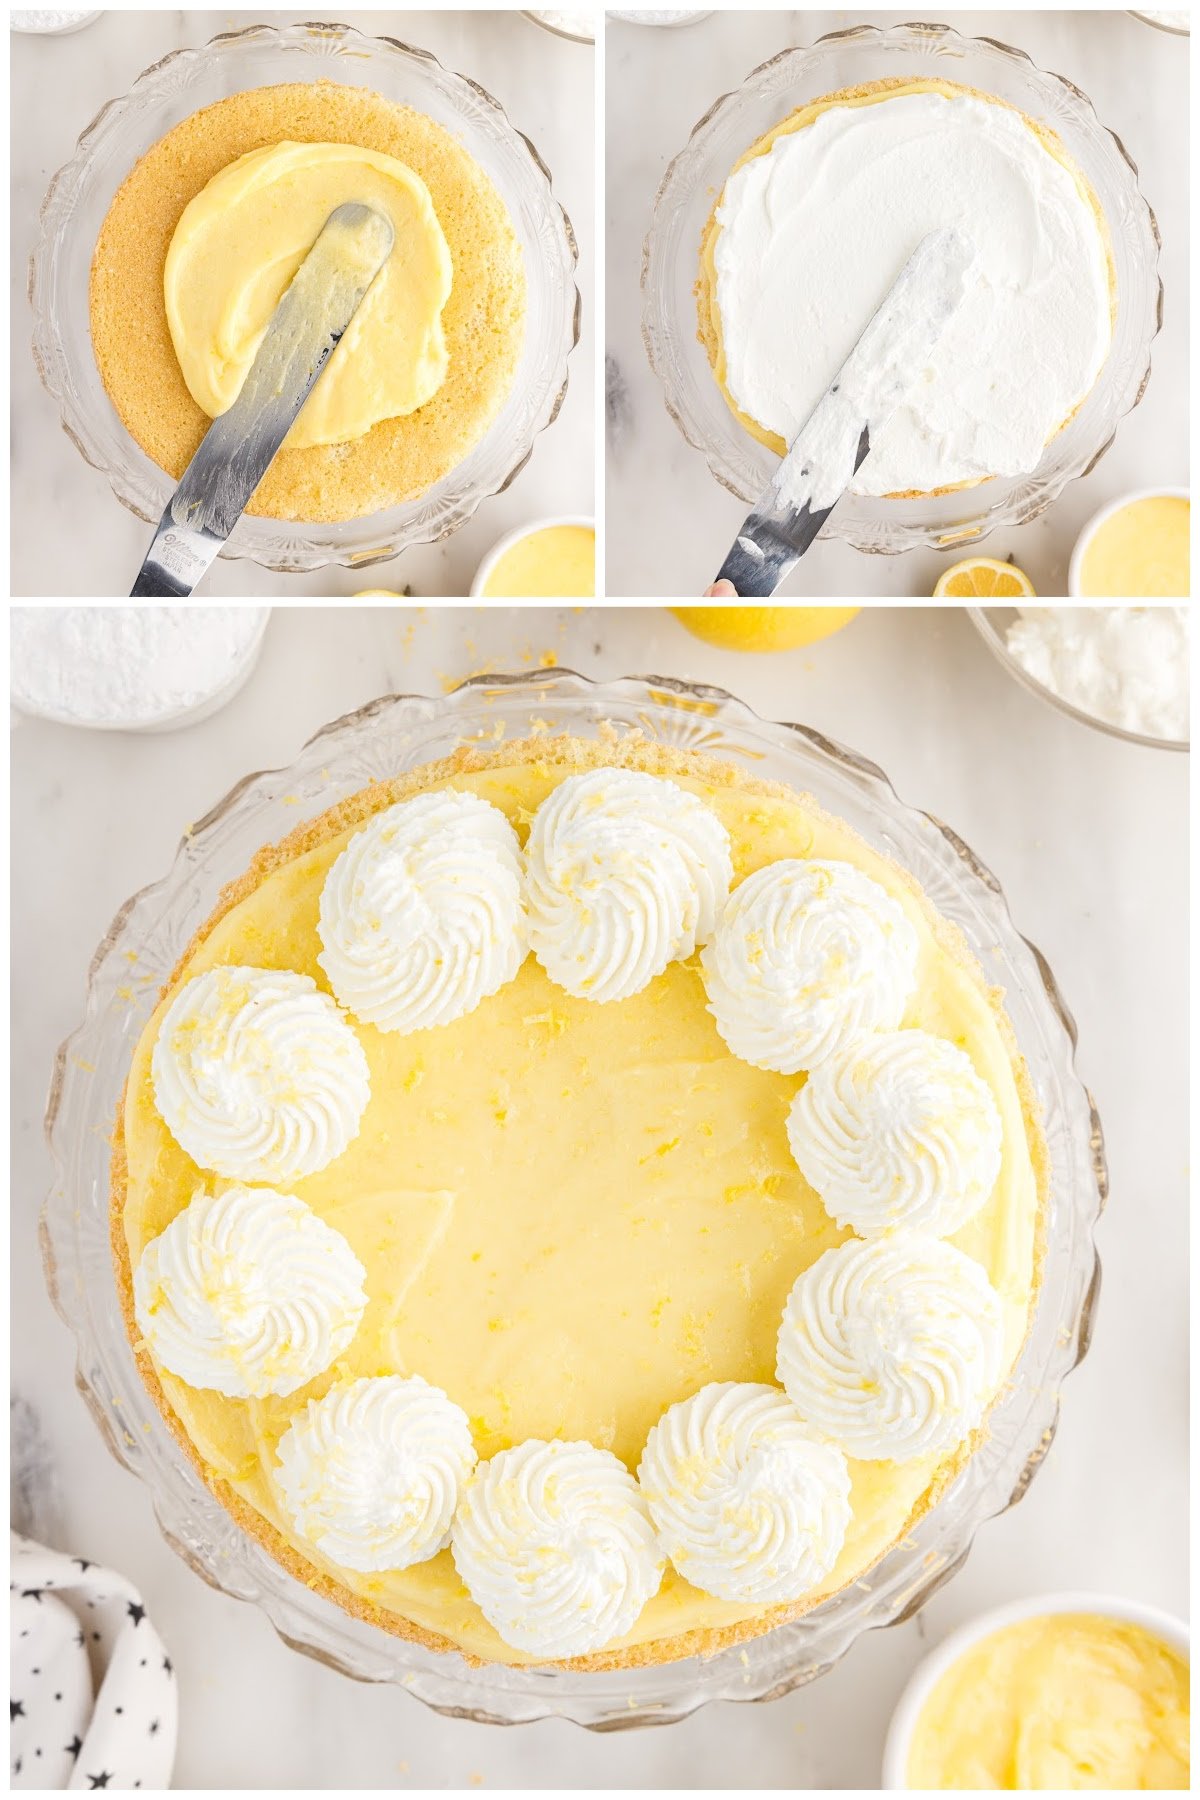 Three images of Lemon Sponge Cake being layered with icing in between and the top of the cake dolloped with icing swirls.